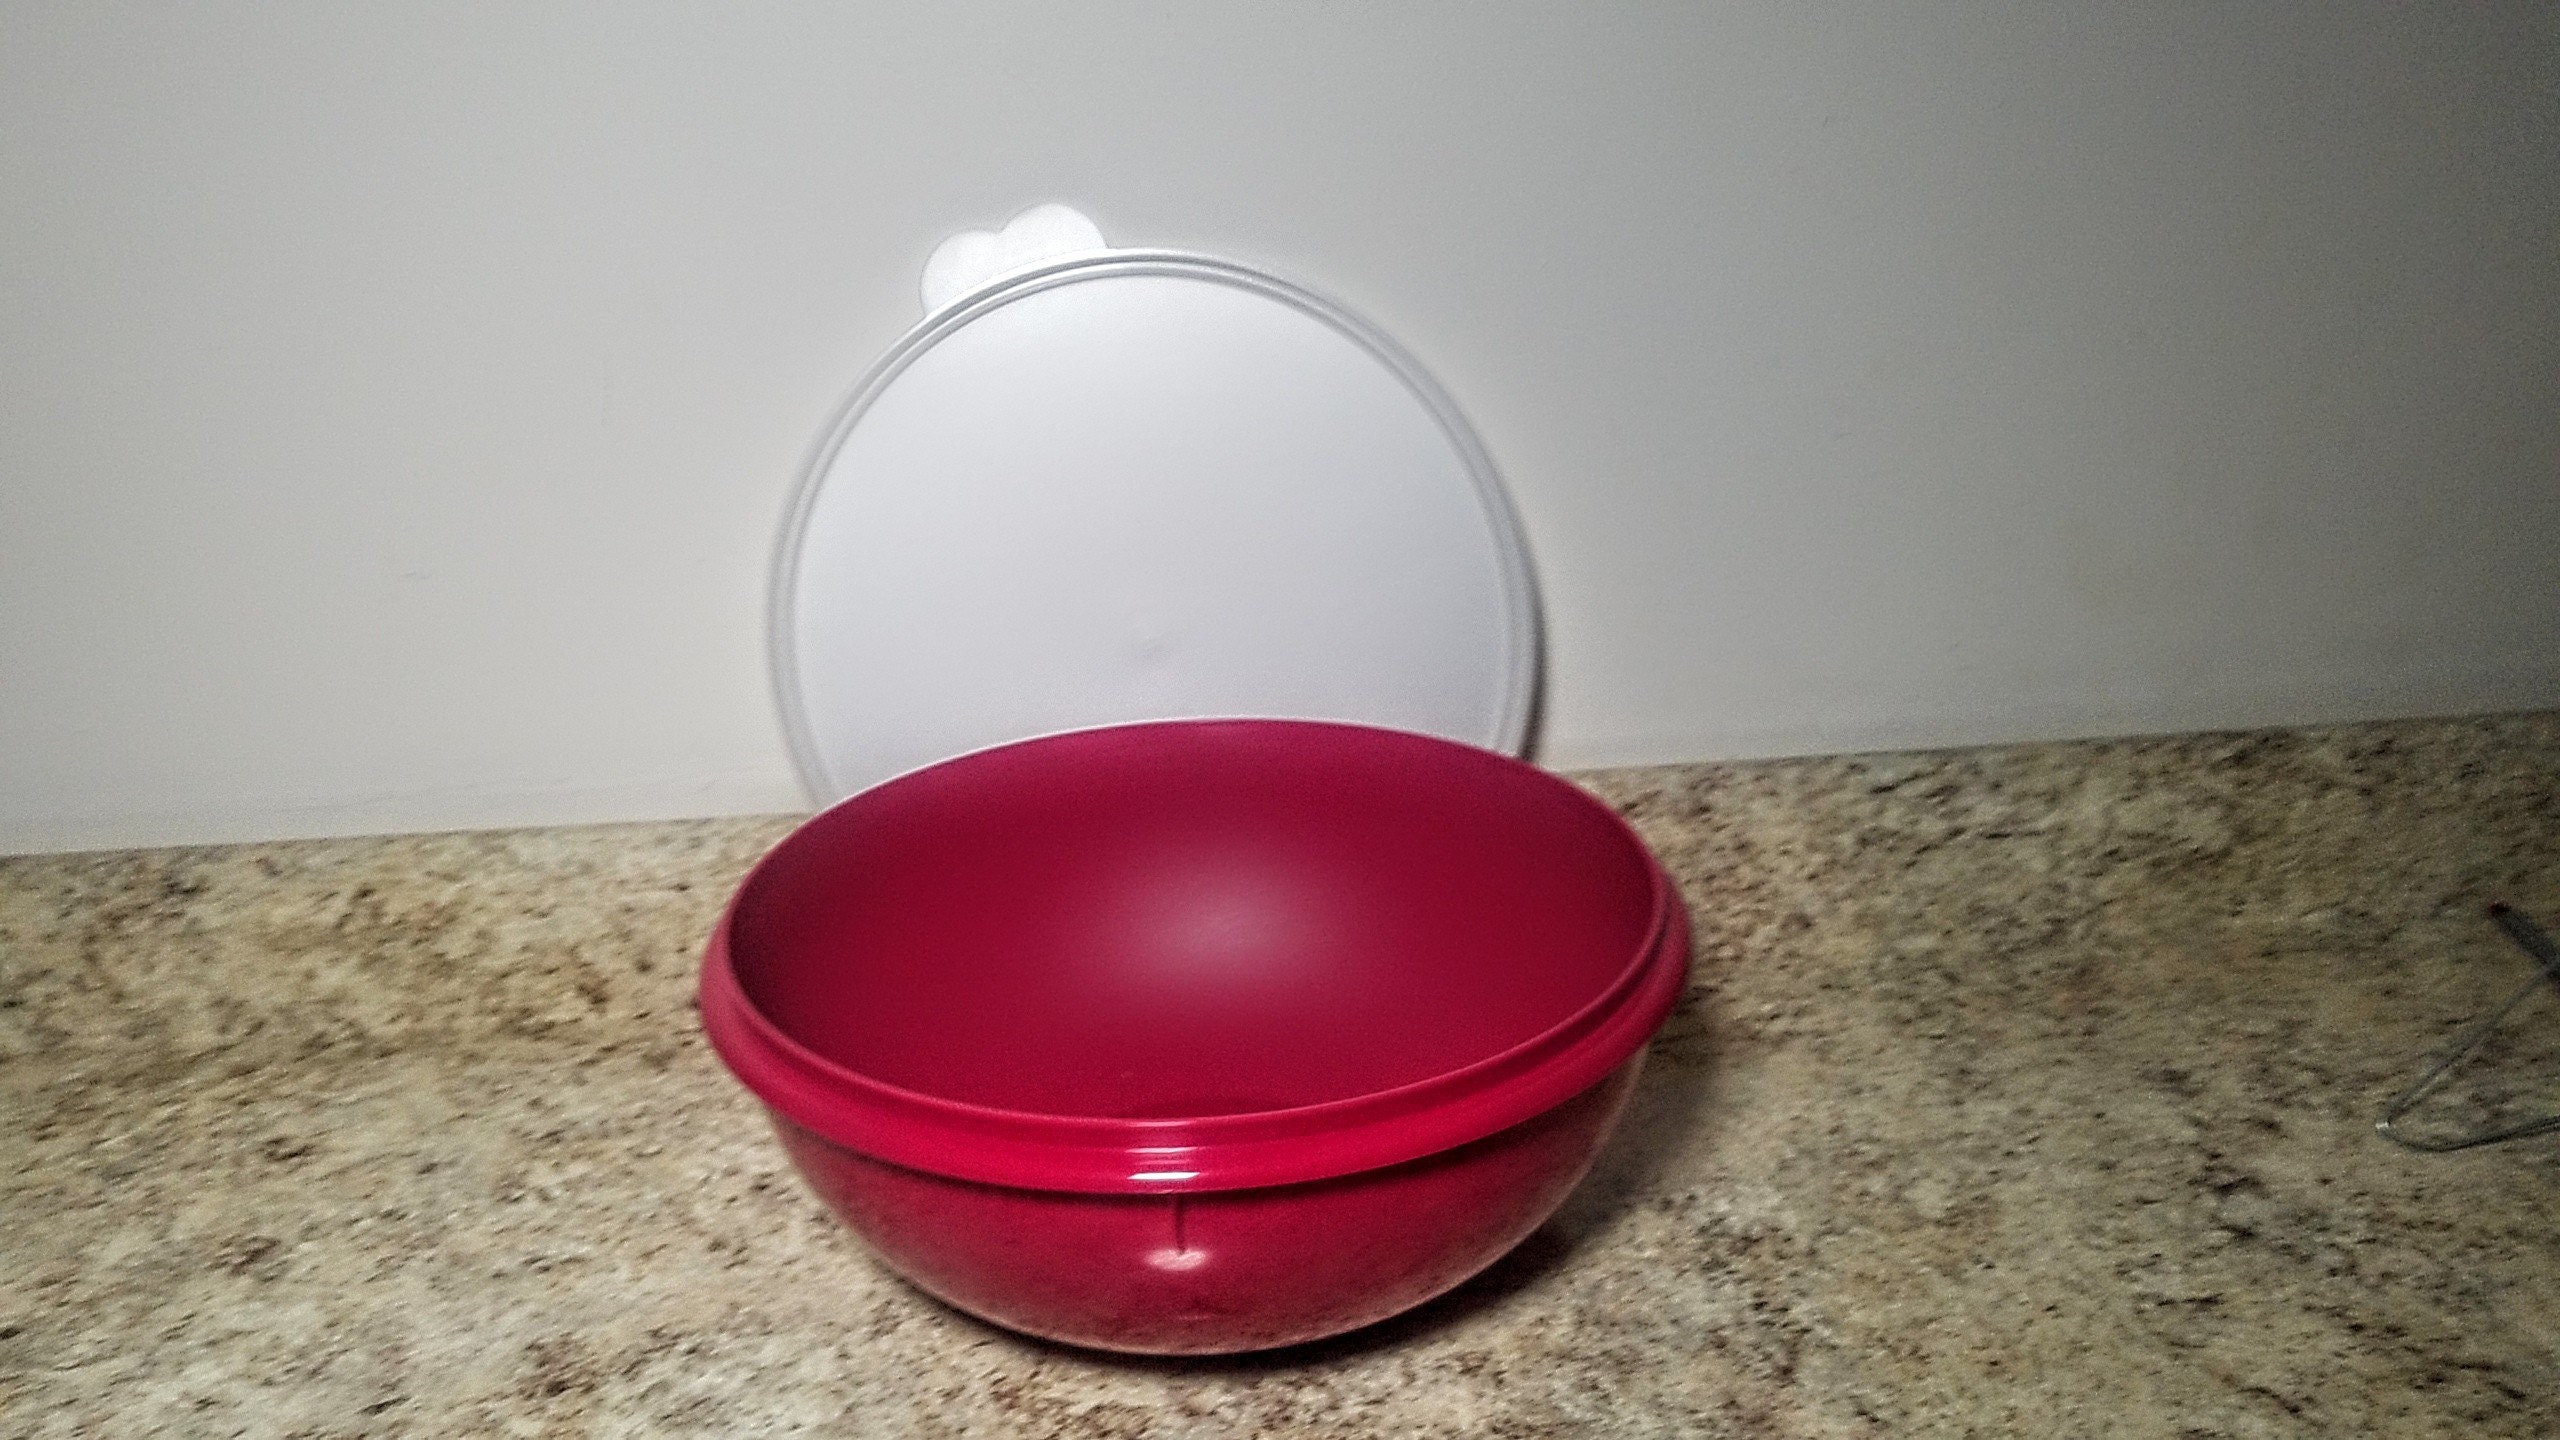 Tupperware 32 Cup Thatsa Bowl Red With White Lid 2539 Large 7.8L